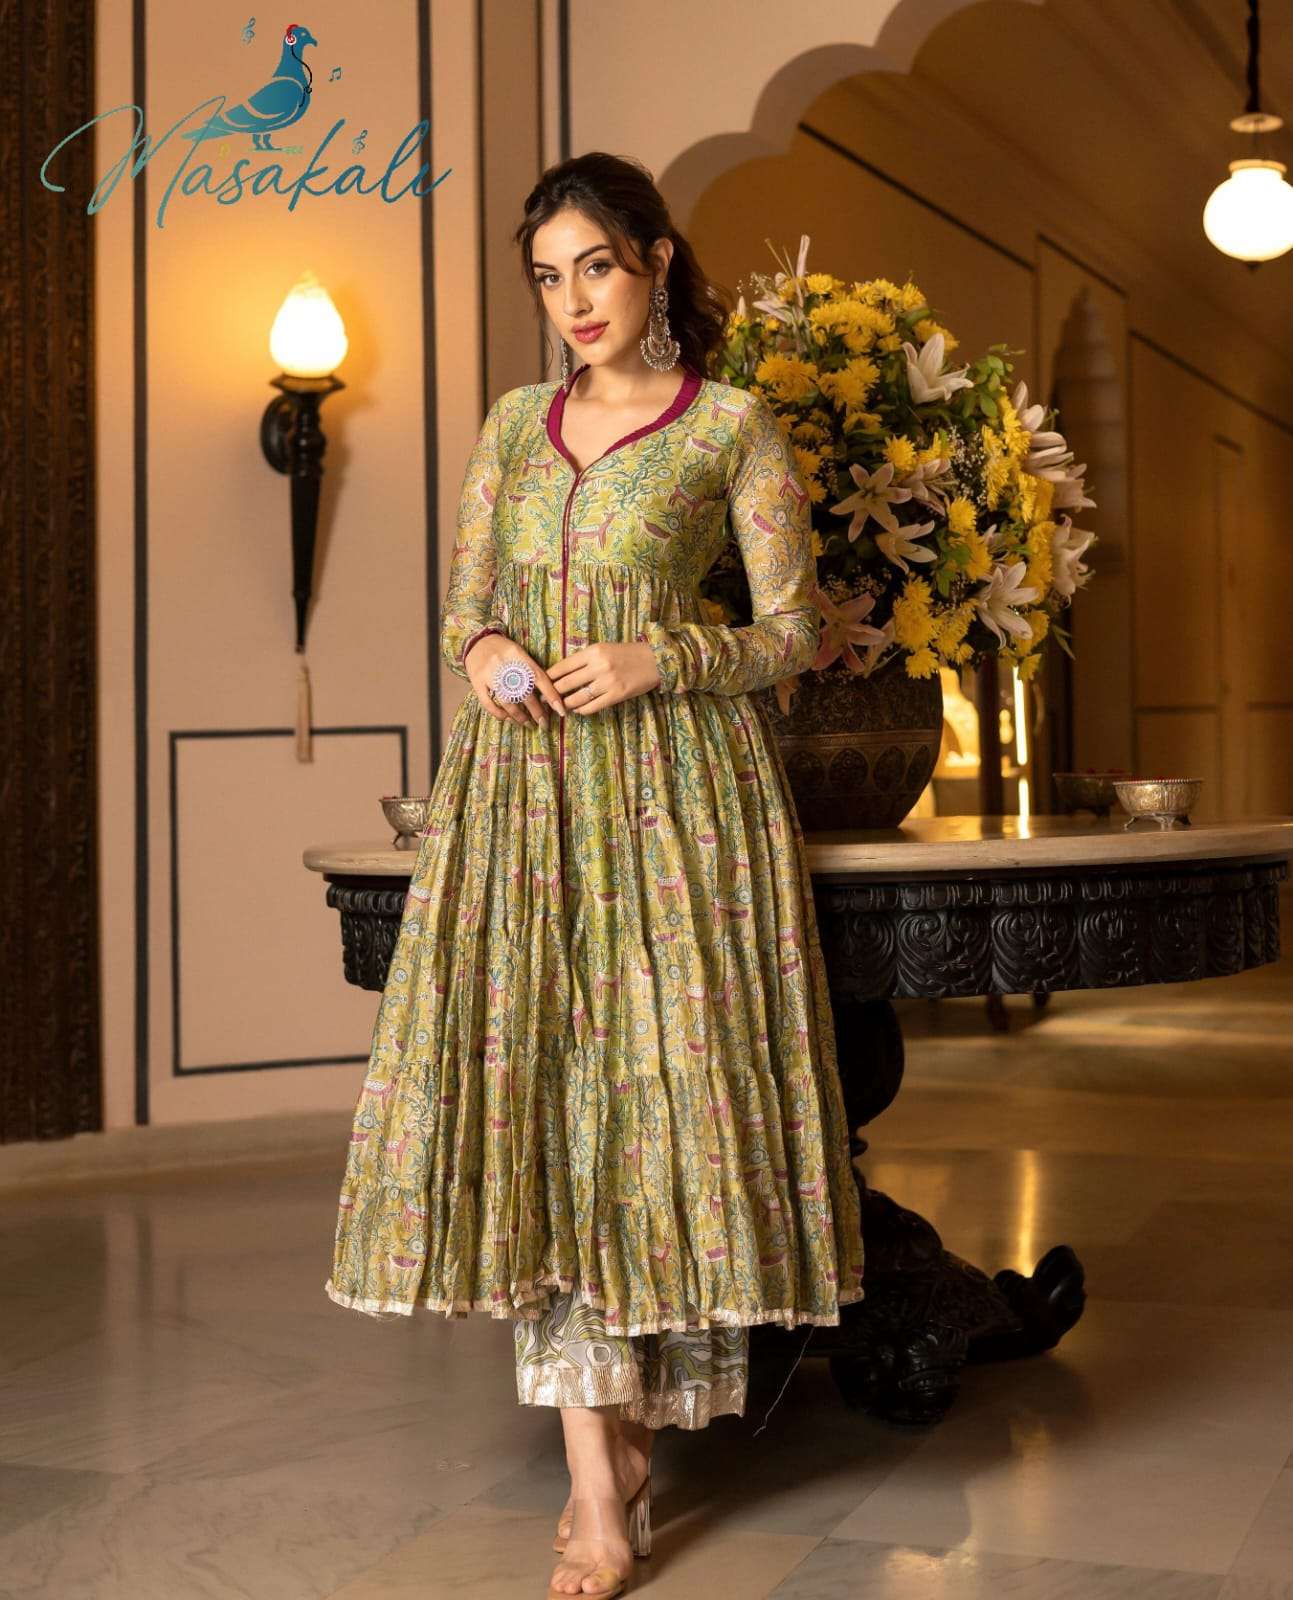 masakali vol 01 new printed stylish flaired kurtis collections three pis soft chanderi silk fabric work digital printed inner full inner in all designs